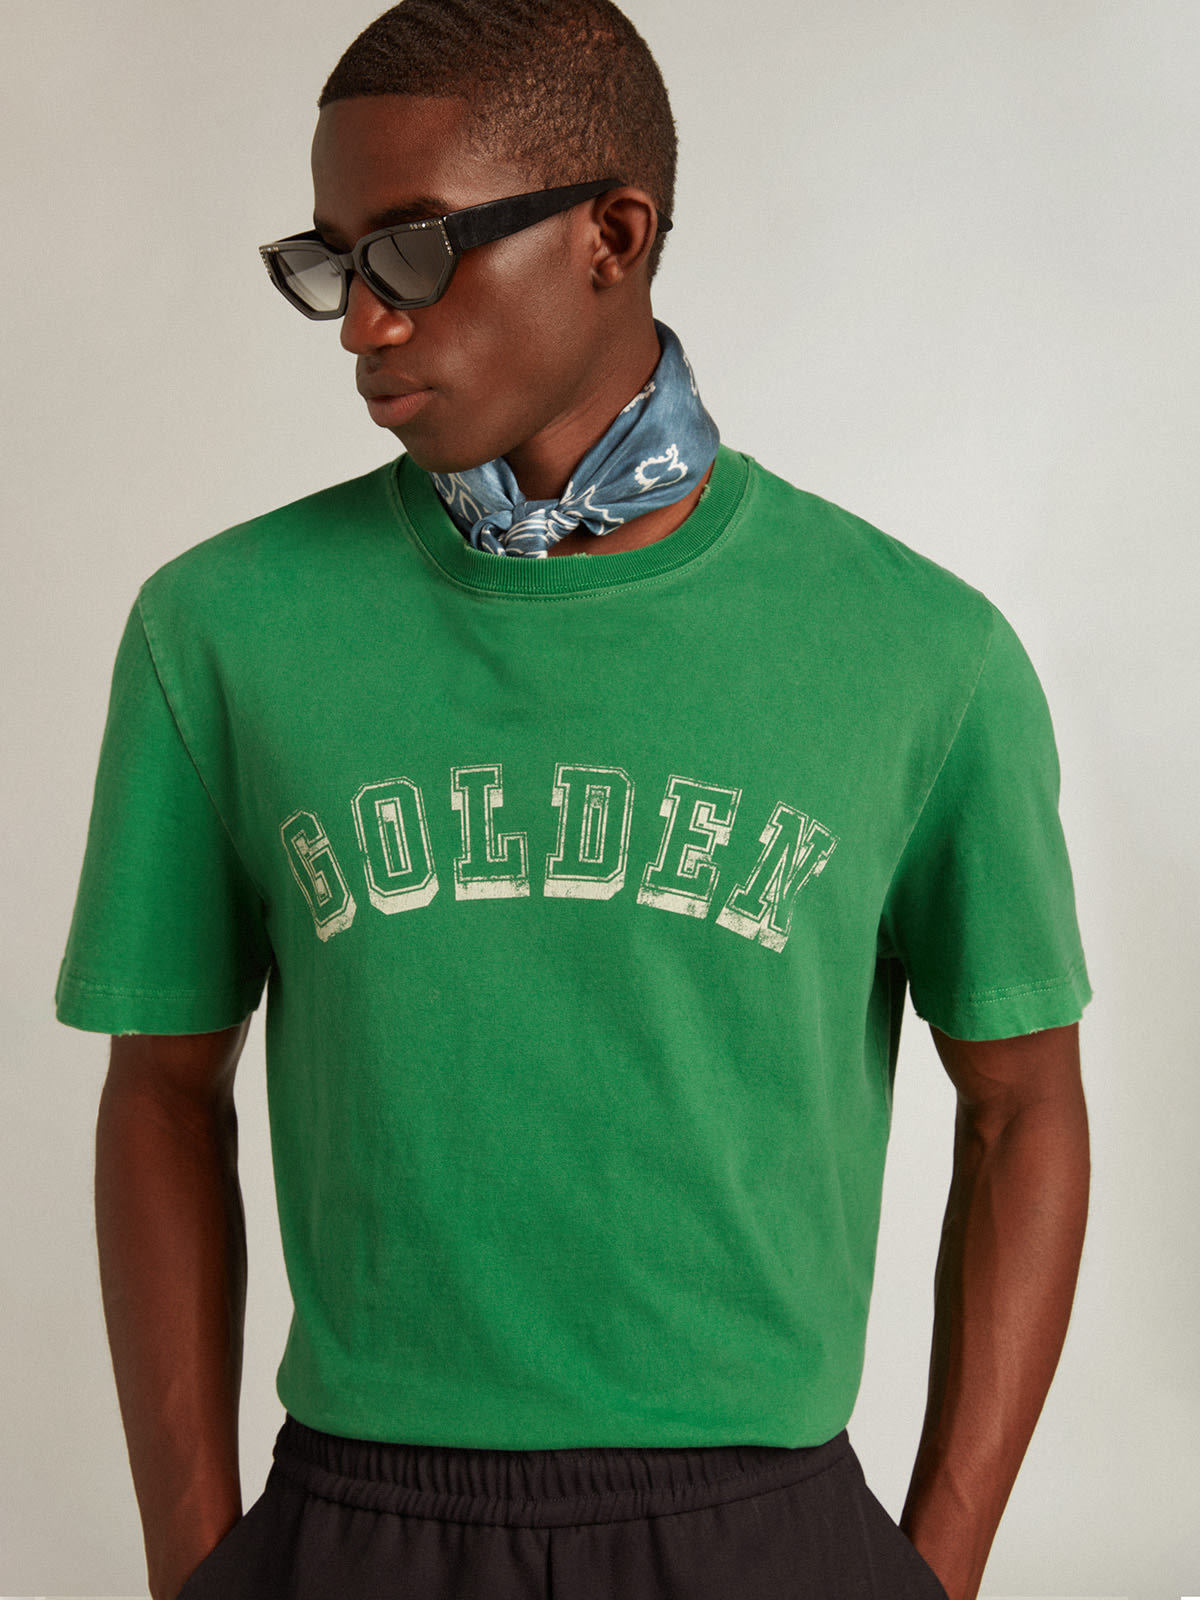 Golden Goose - Men’s green cotton T-shirt with lettering at the center in 